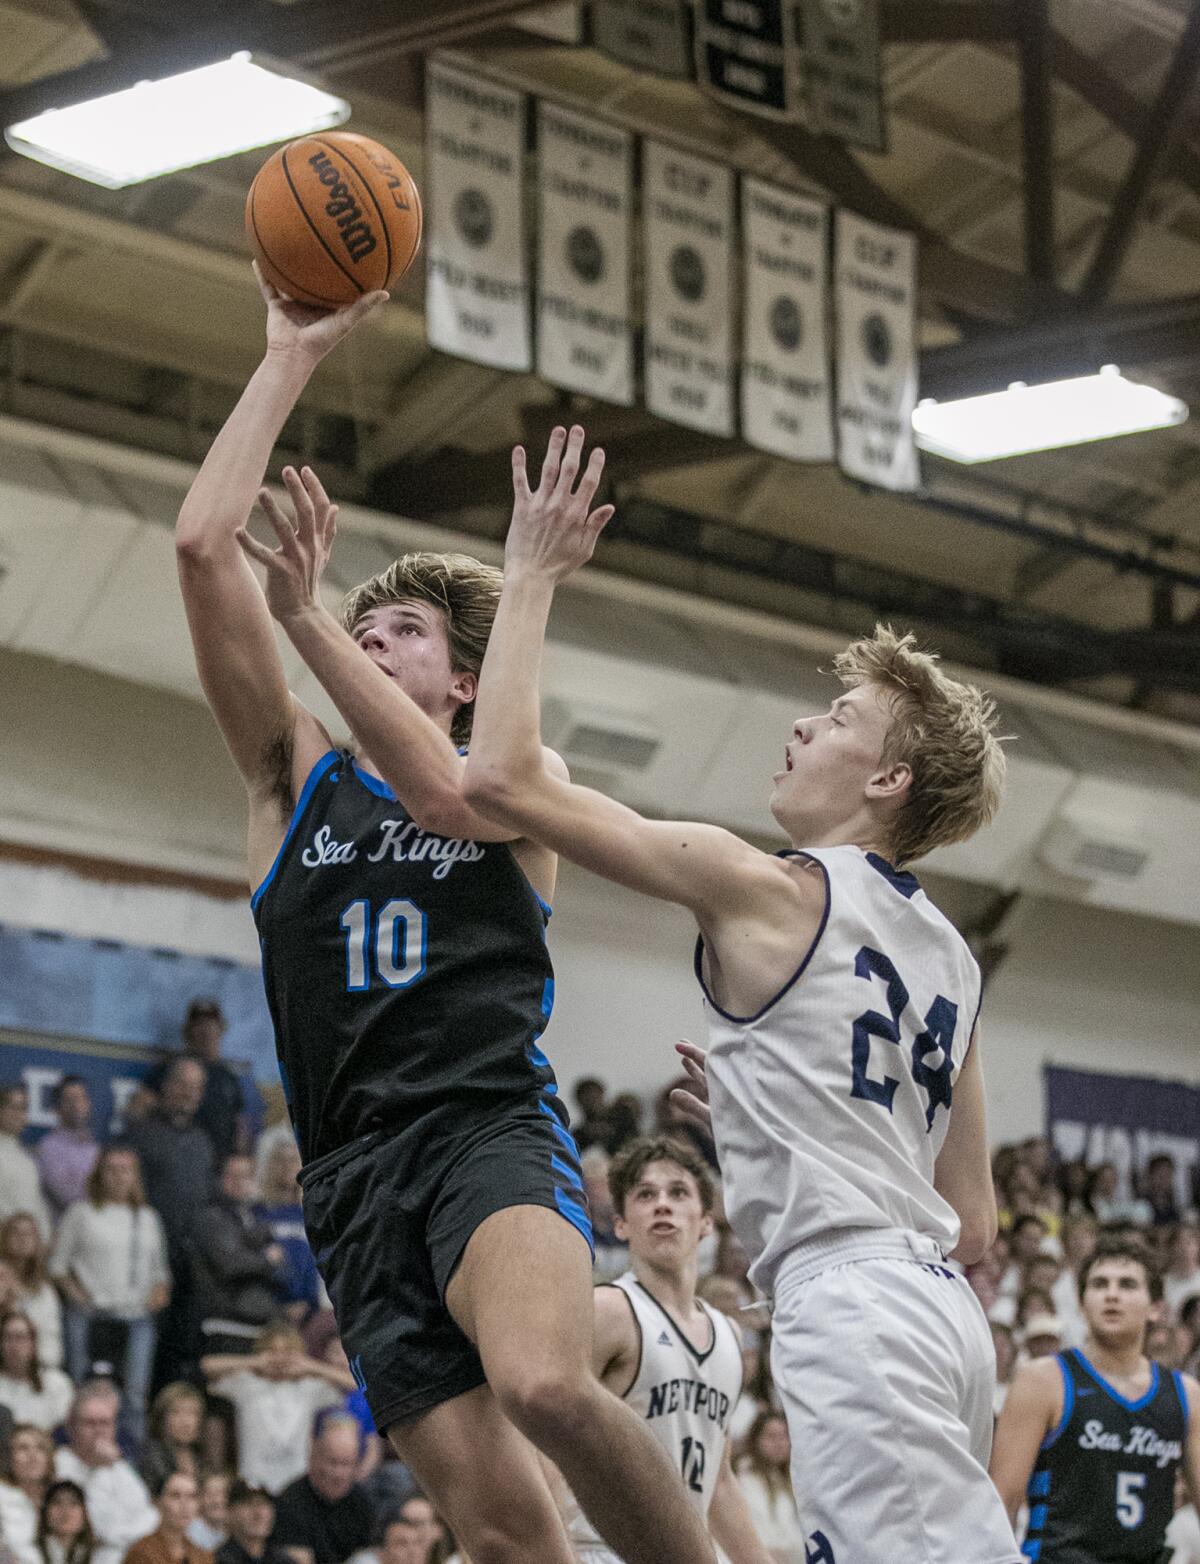 Corona del Mar's Jackson Harlan goes up for a shot against Newport Harbor's Adam Gaa during Wednesday's game.